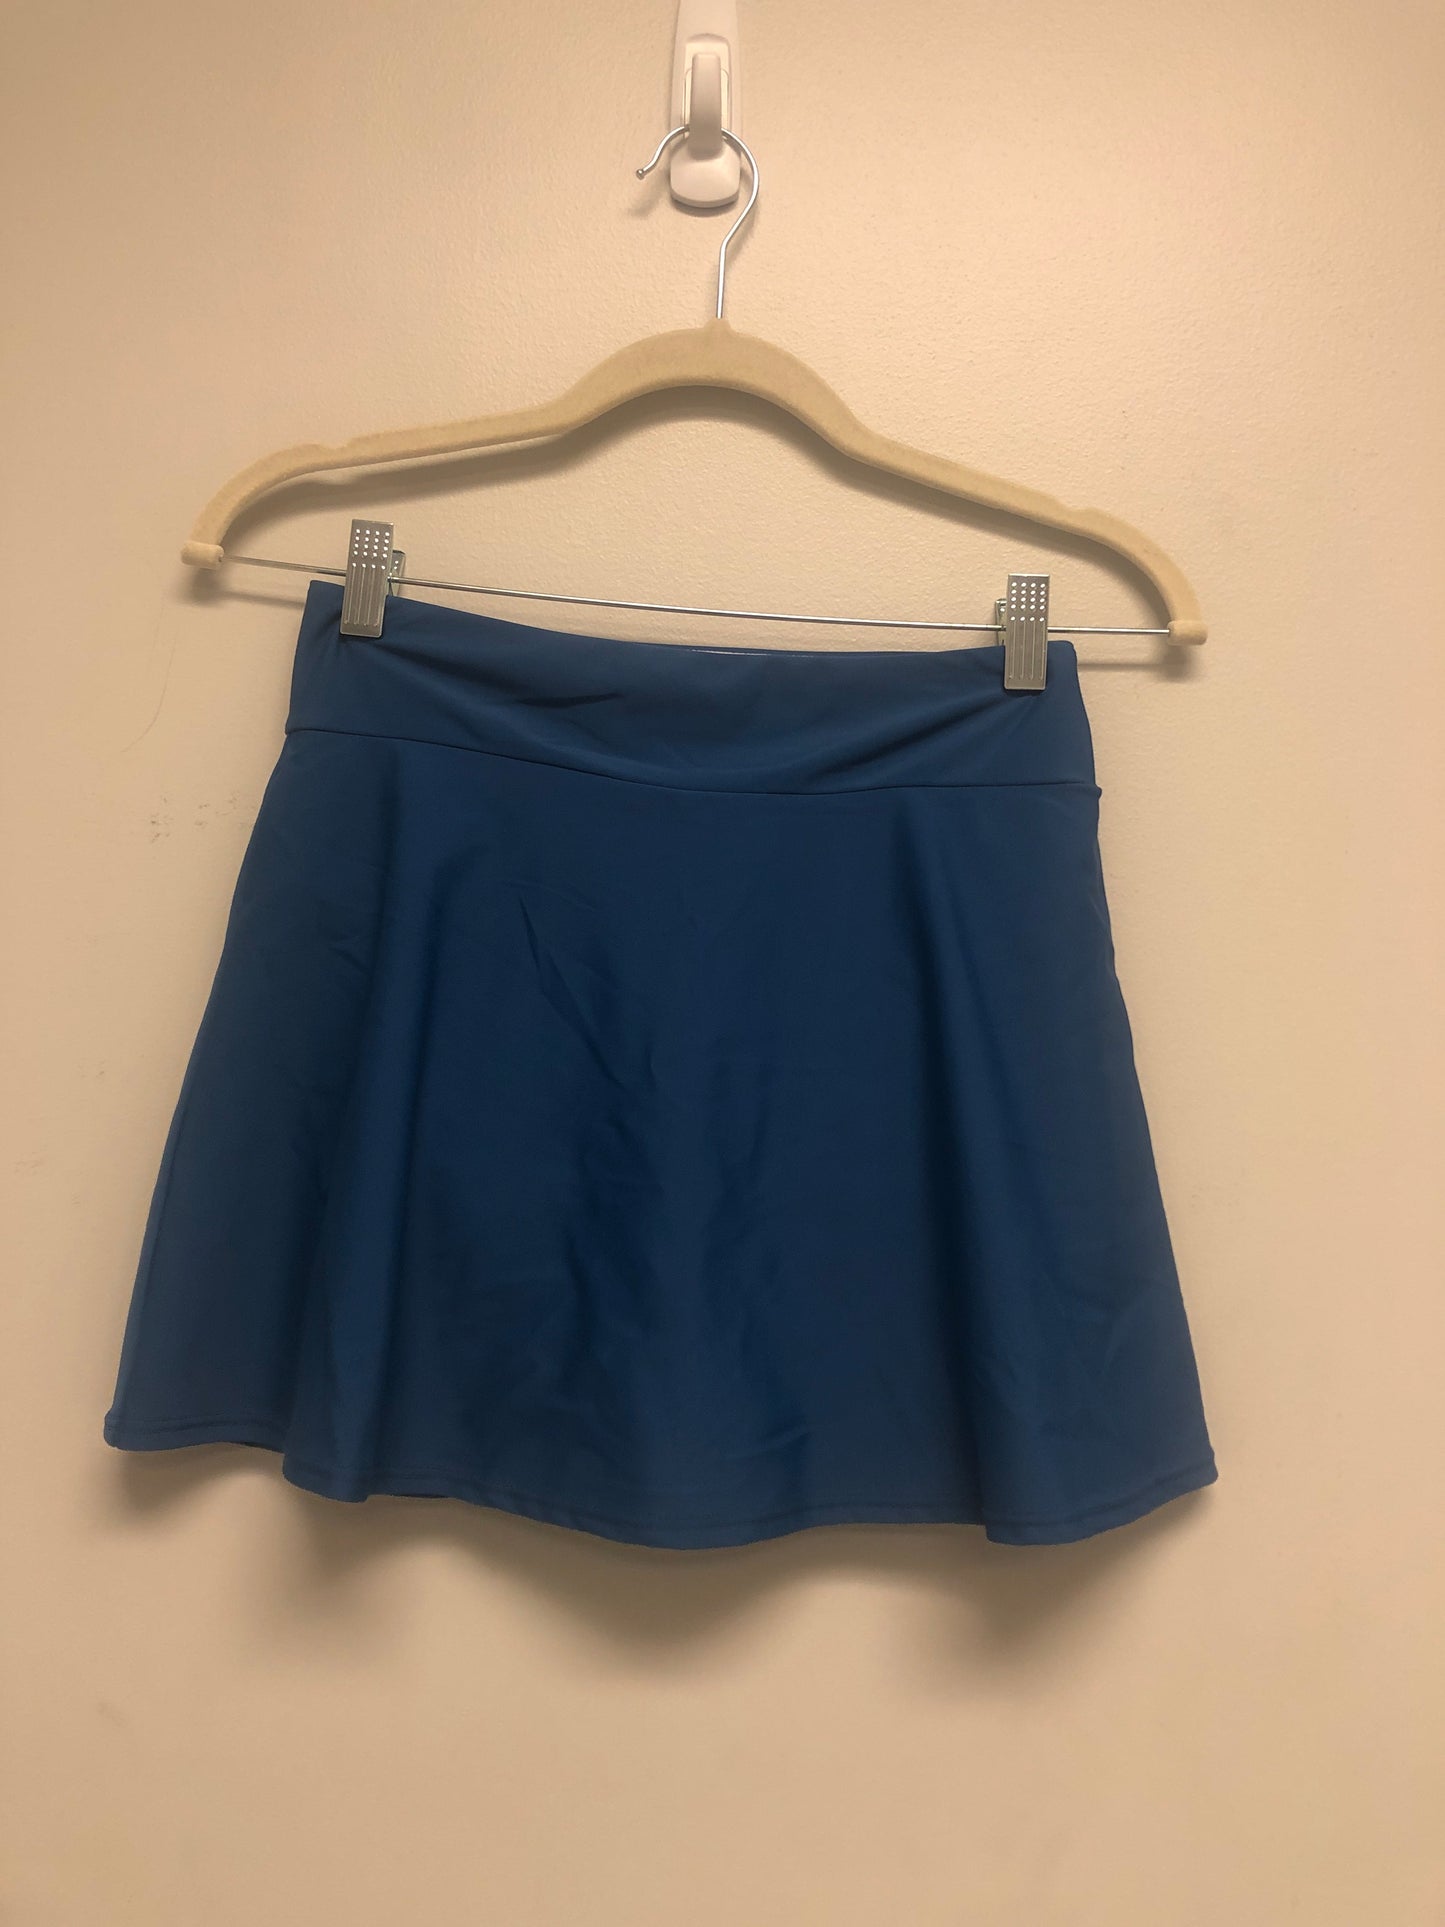 Outlet 6593 - Latched Mama Sporty Swim Skirt - Final Sale - Teal - Extra Small